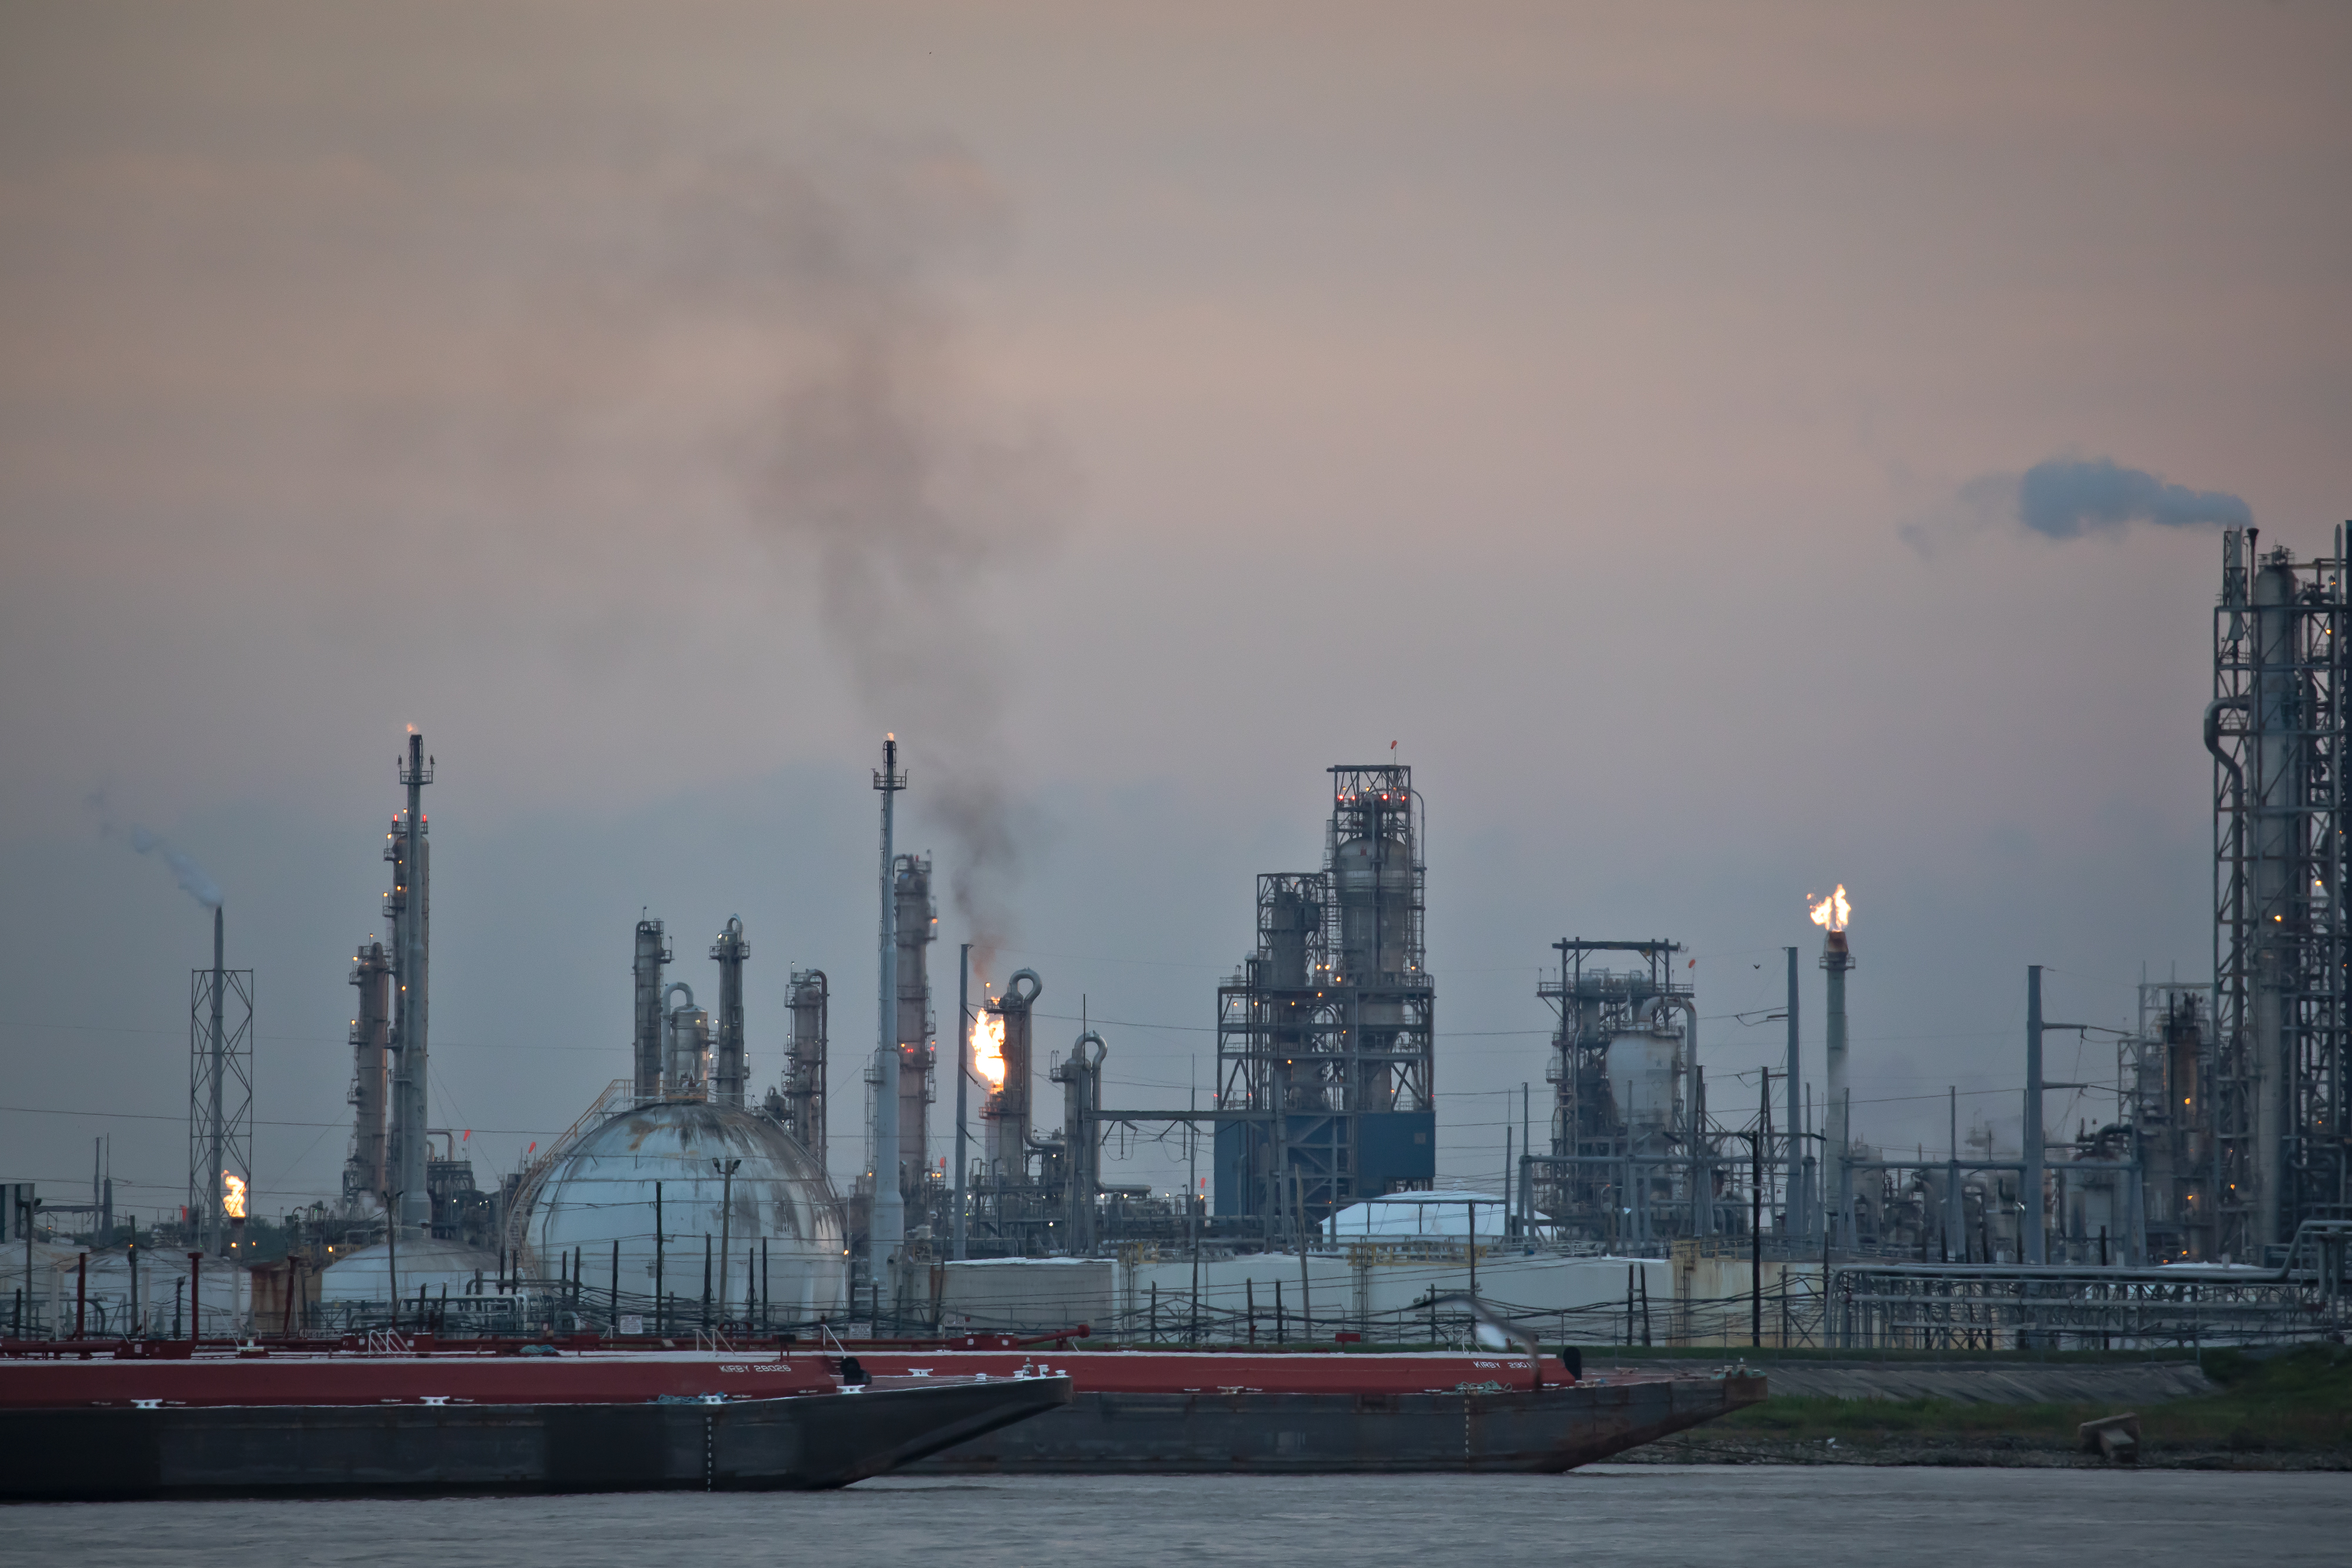 Dow Chemical Plant Flares in Louisiana's 'Cancer Alley' - Photographer Julie Dermansky